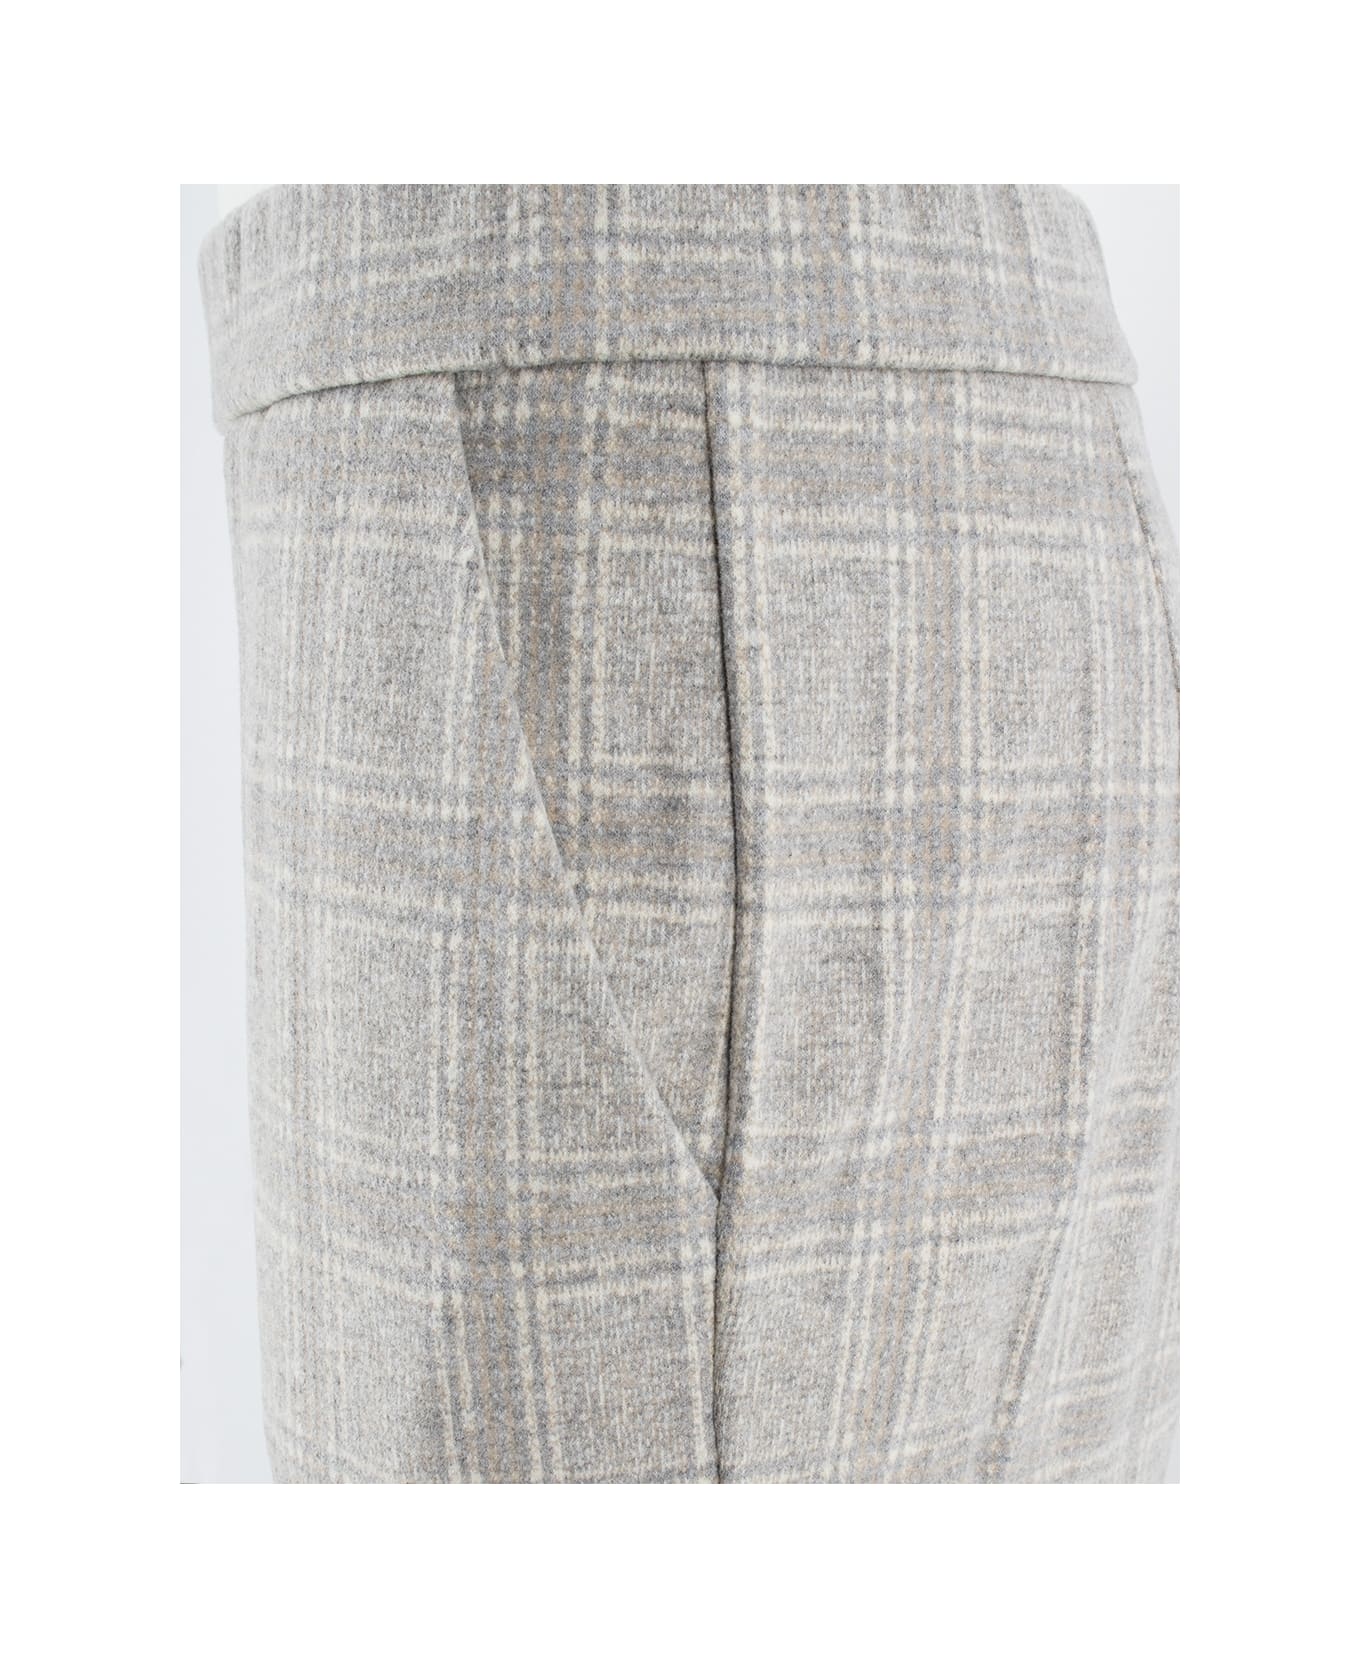 Le Tricot Perugia Trousers - GREY/BEIGE